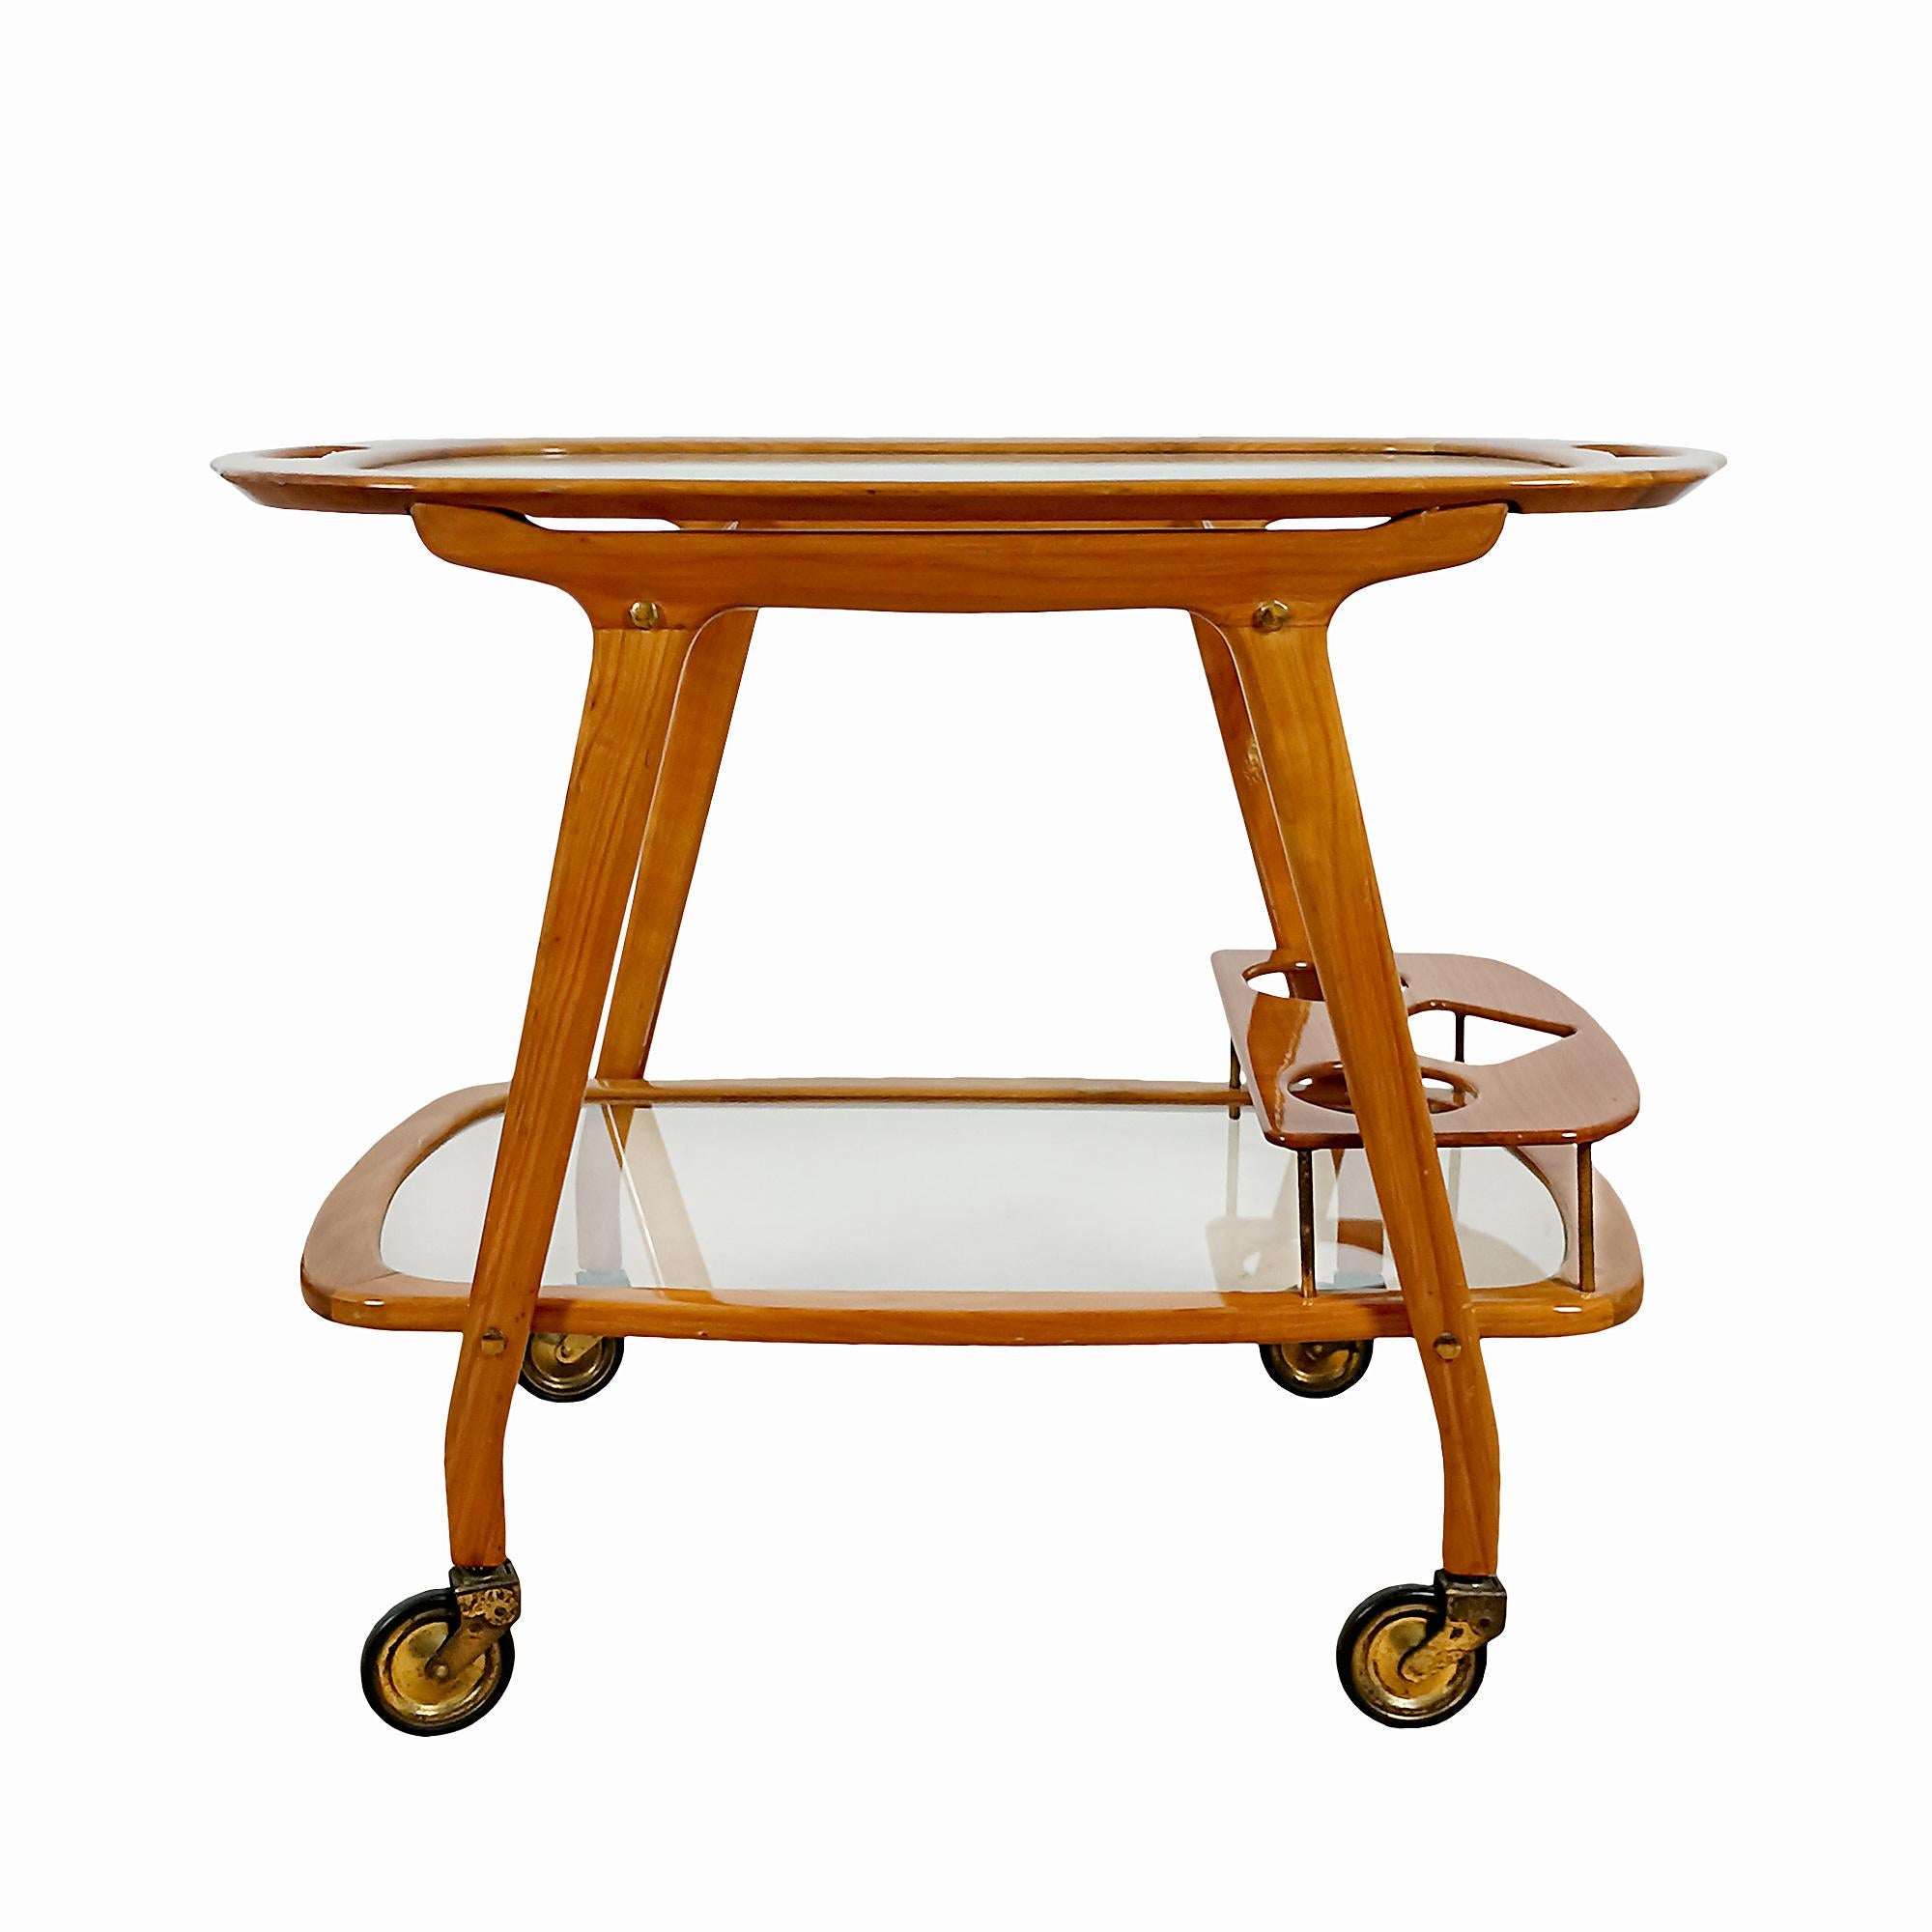 Solid cherry wood and glass bar cart with removable tray, bottle rack on the lower level and brass wheels and finishes. Original polyurethane varnish in good condition.
Design: Cesare Lacca

Italy c. 1950